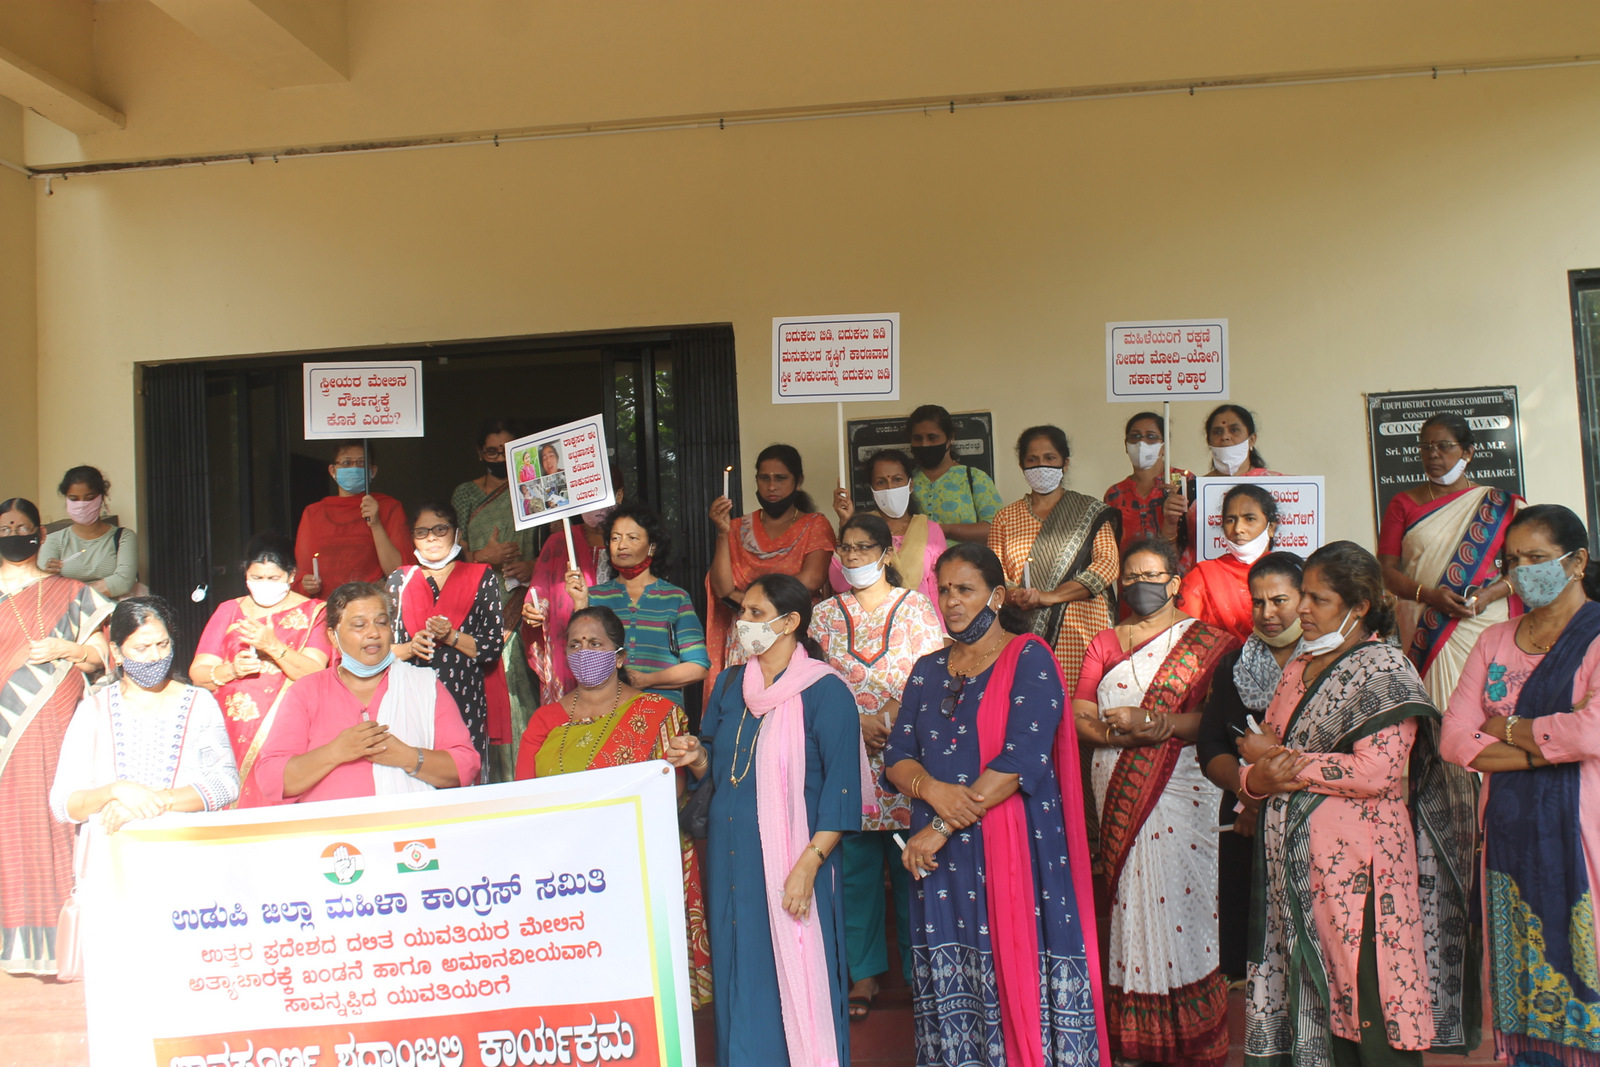 Udupi District Mahila Congress stages a protest against the gang rape at Hathras, UP